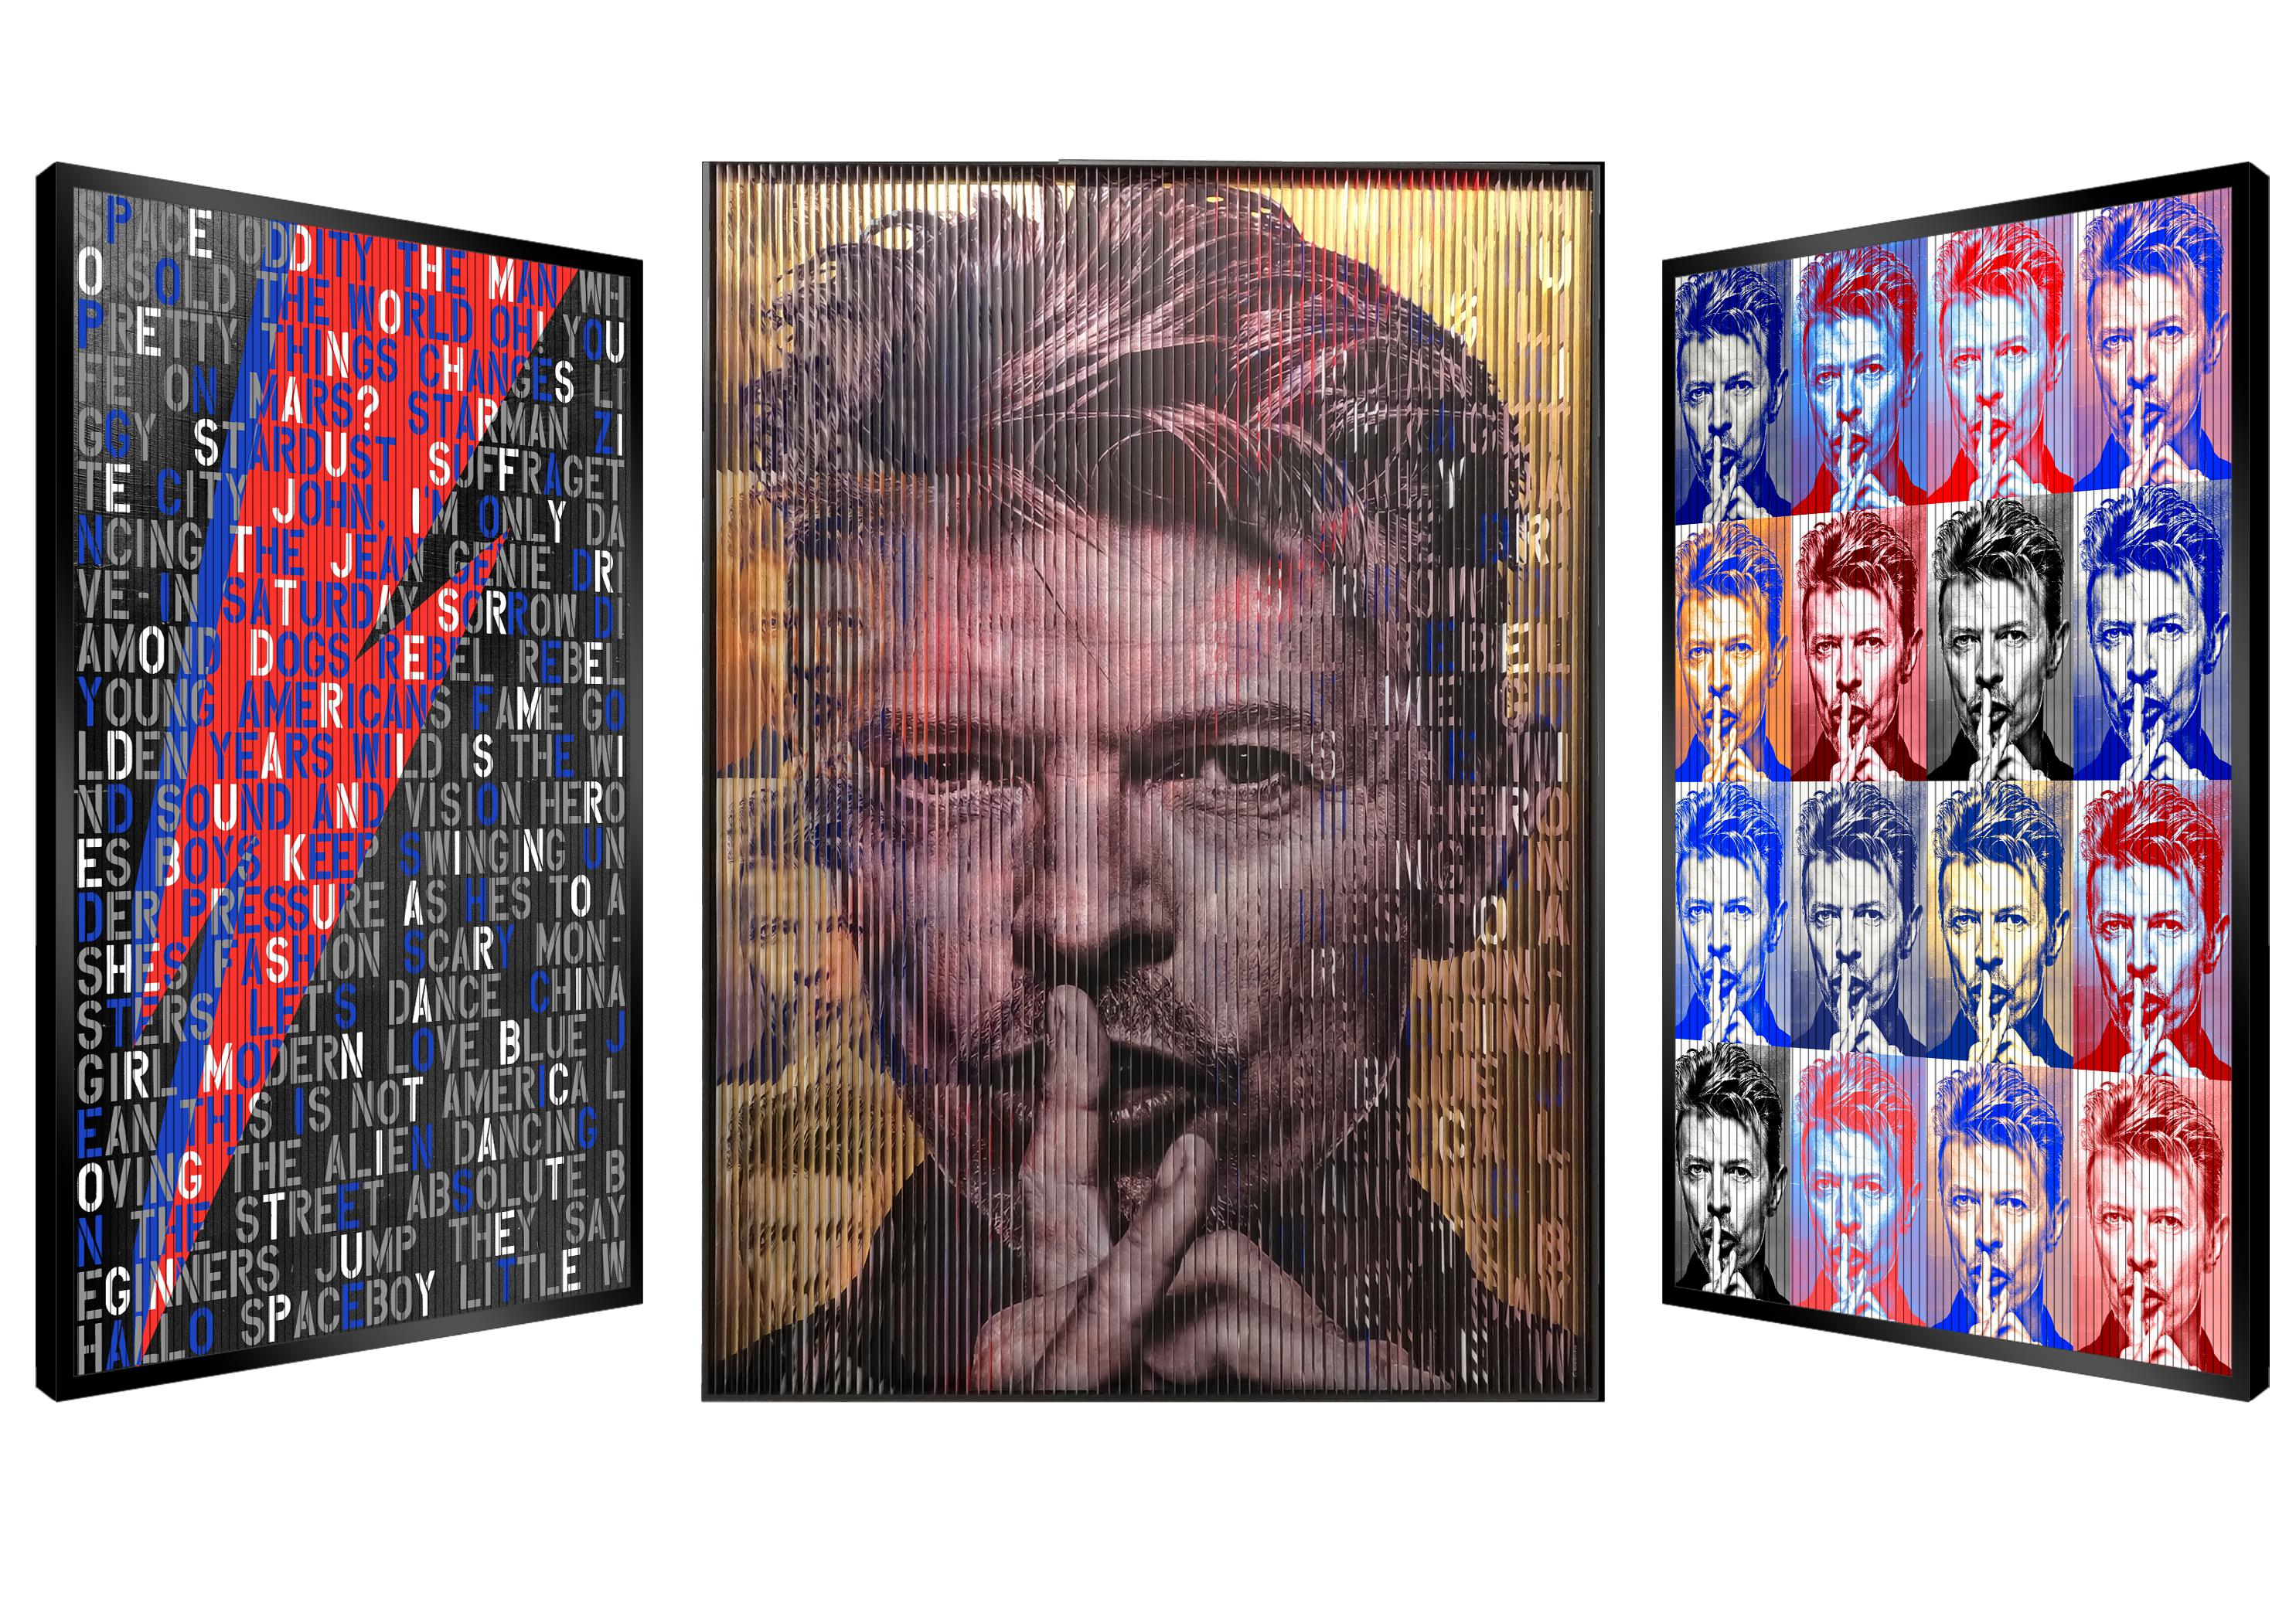 "Explosion D'amour" David Bowie, Original Kinetic Artwork on Panel, Silver Leaf - Mixed Media Art by Patrick Rubinstein